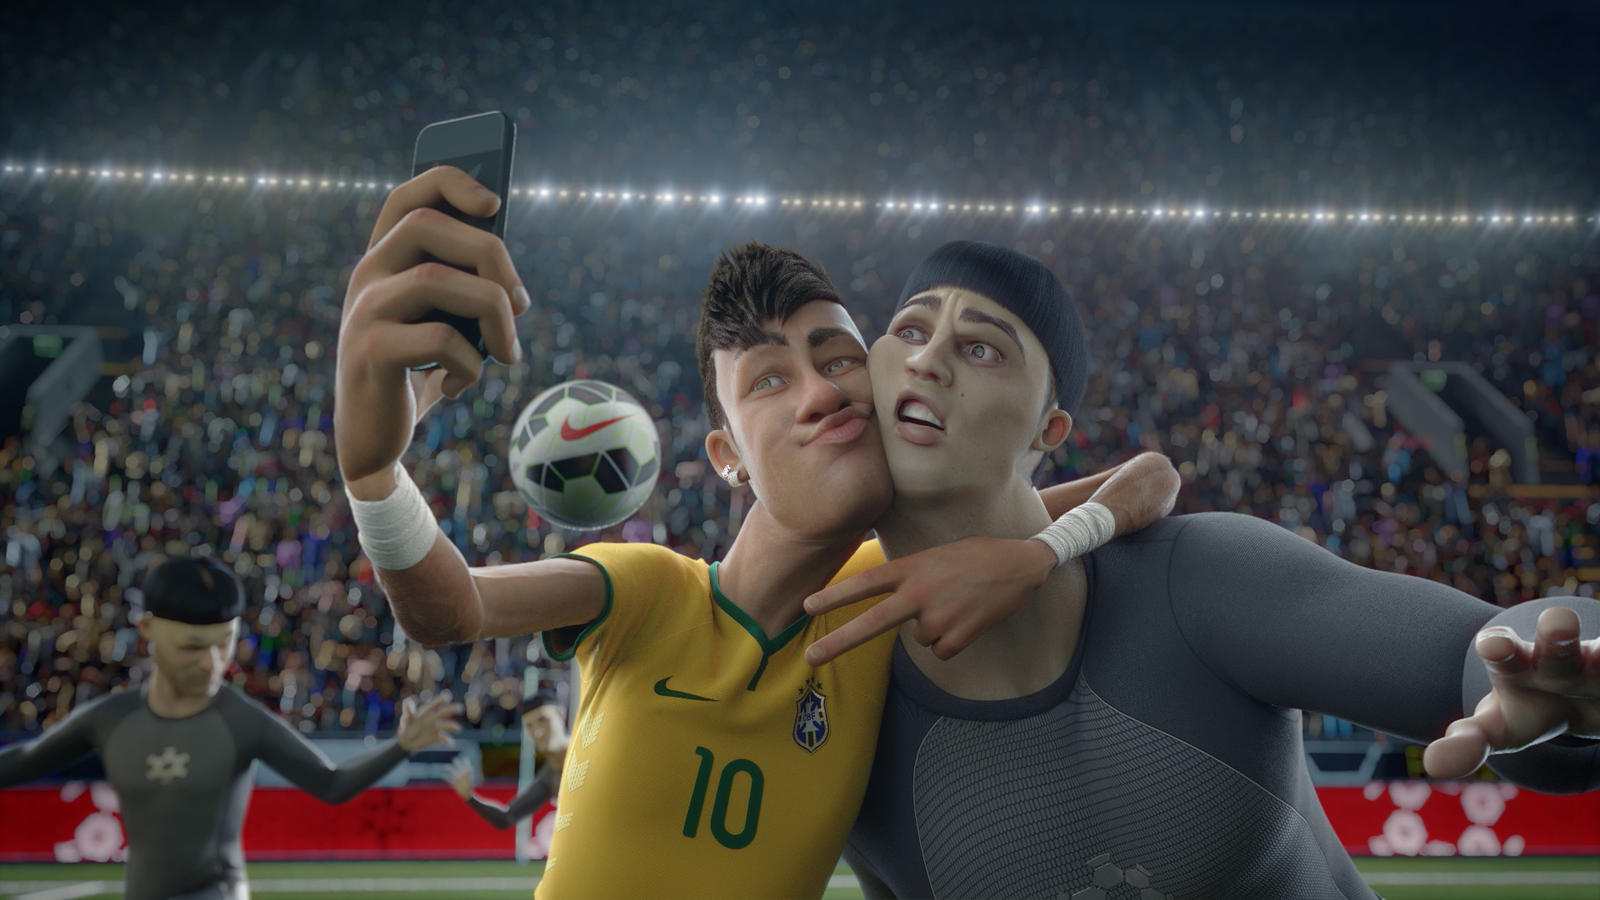 Nike Football launches The Last Game   Nike News